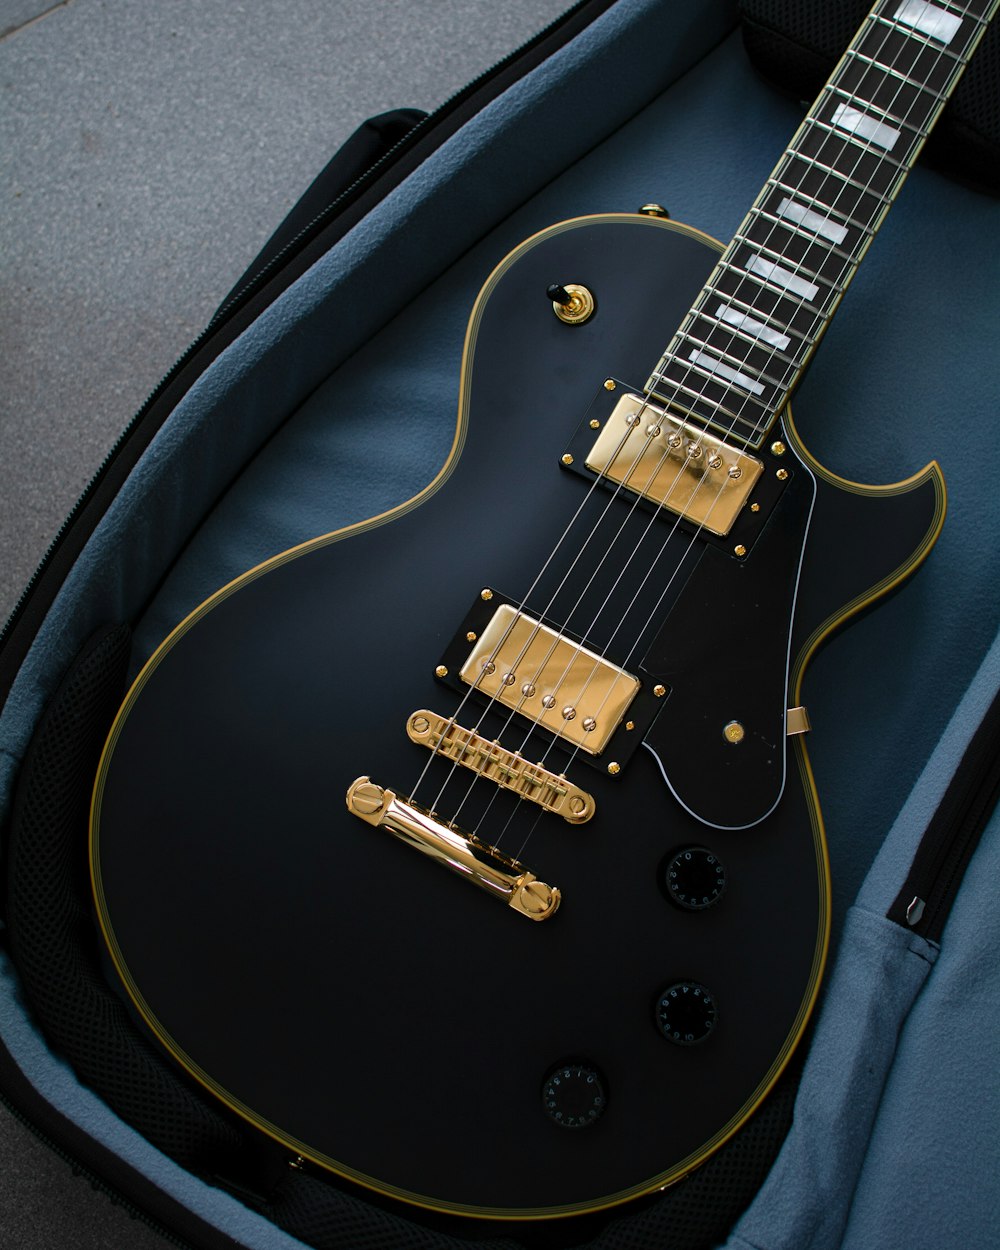 a black and gold electric guitar in a case